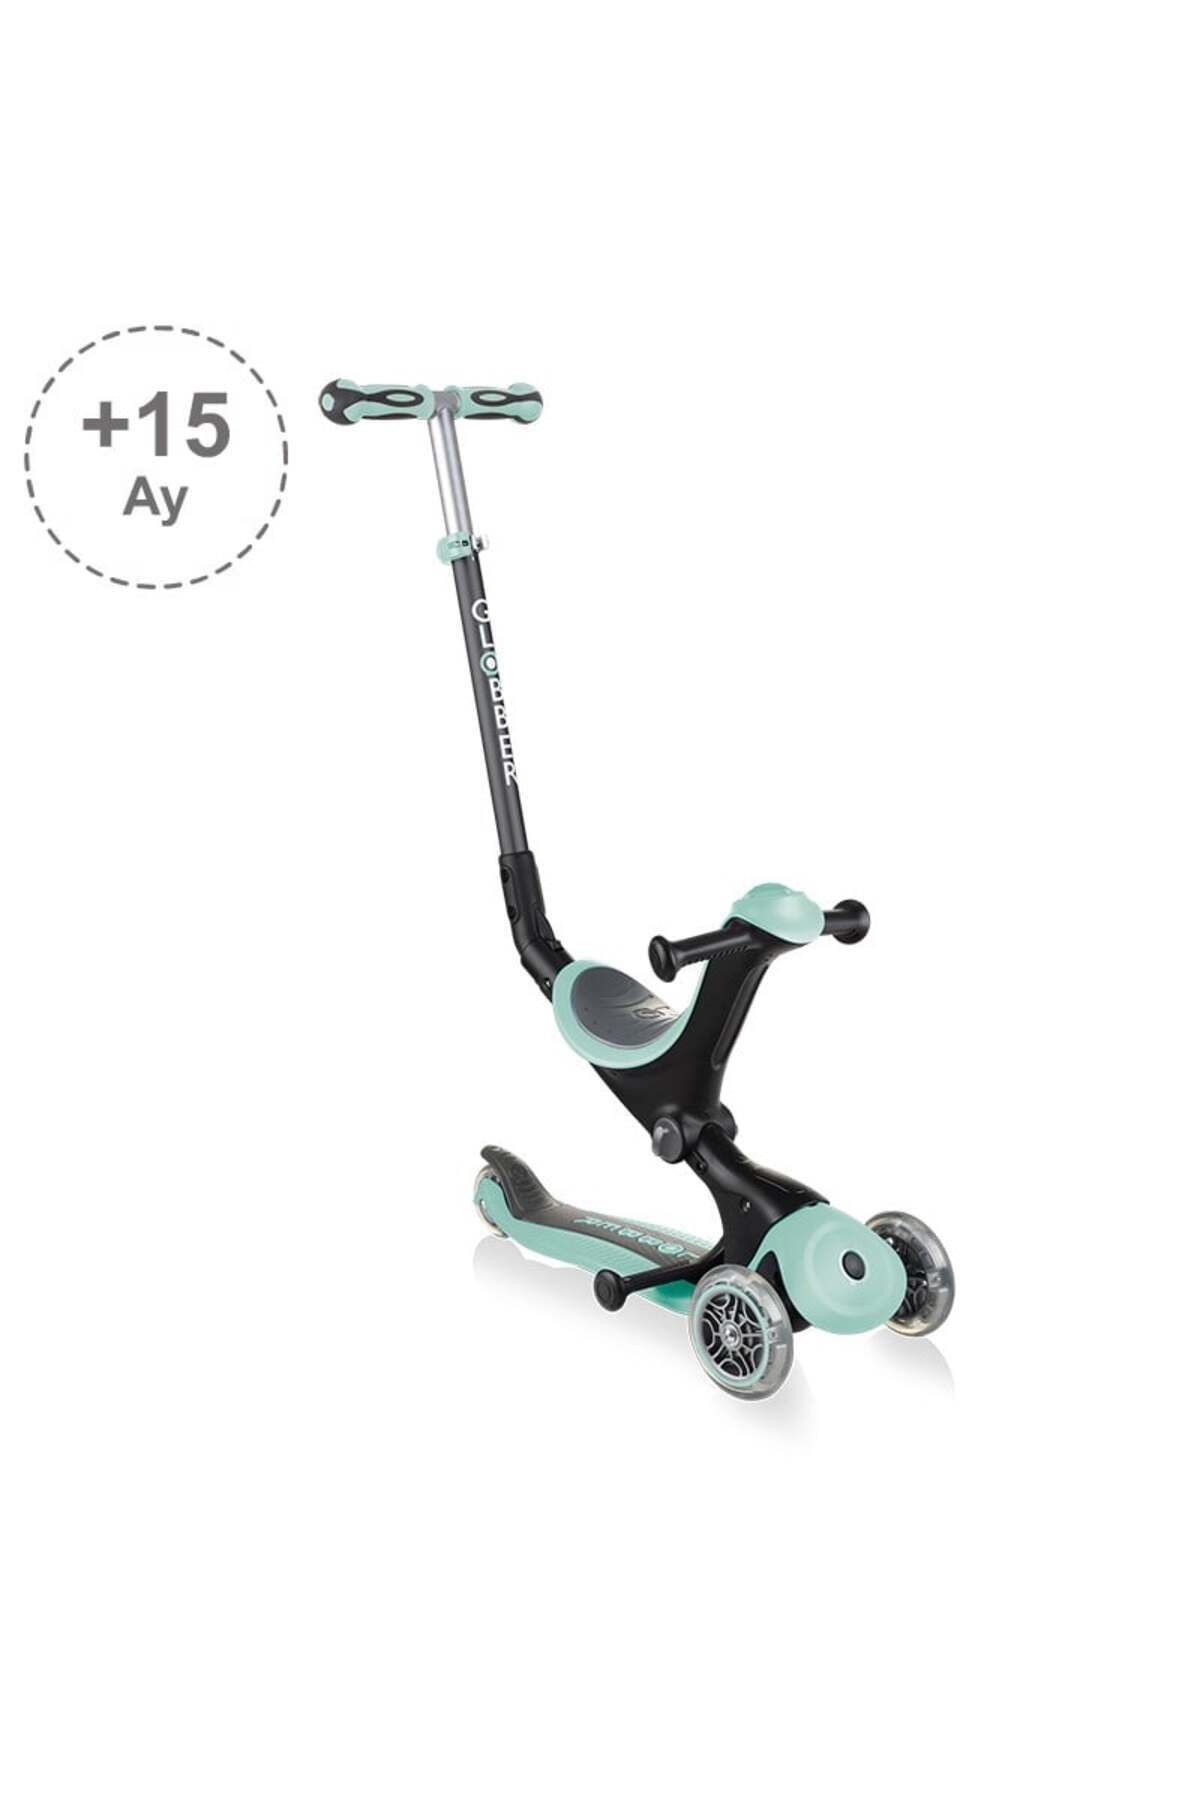 Globber Go Up Deluxe Scooter - Mint Yeşili